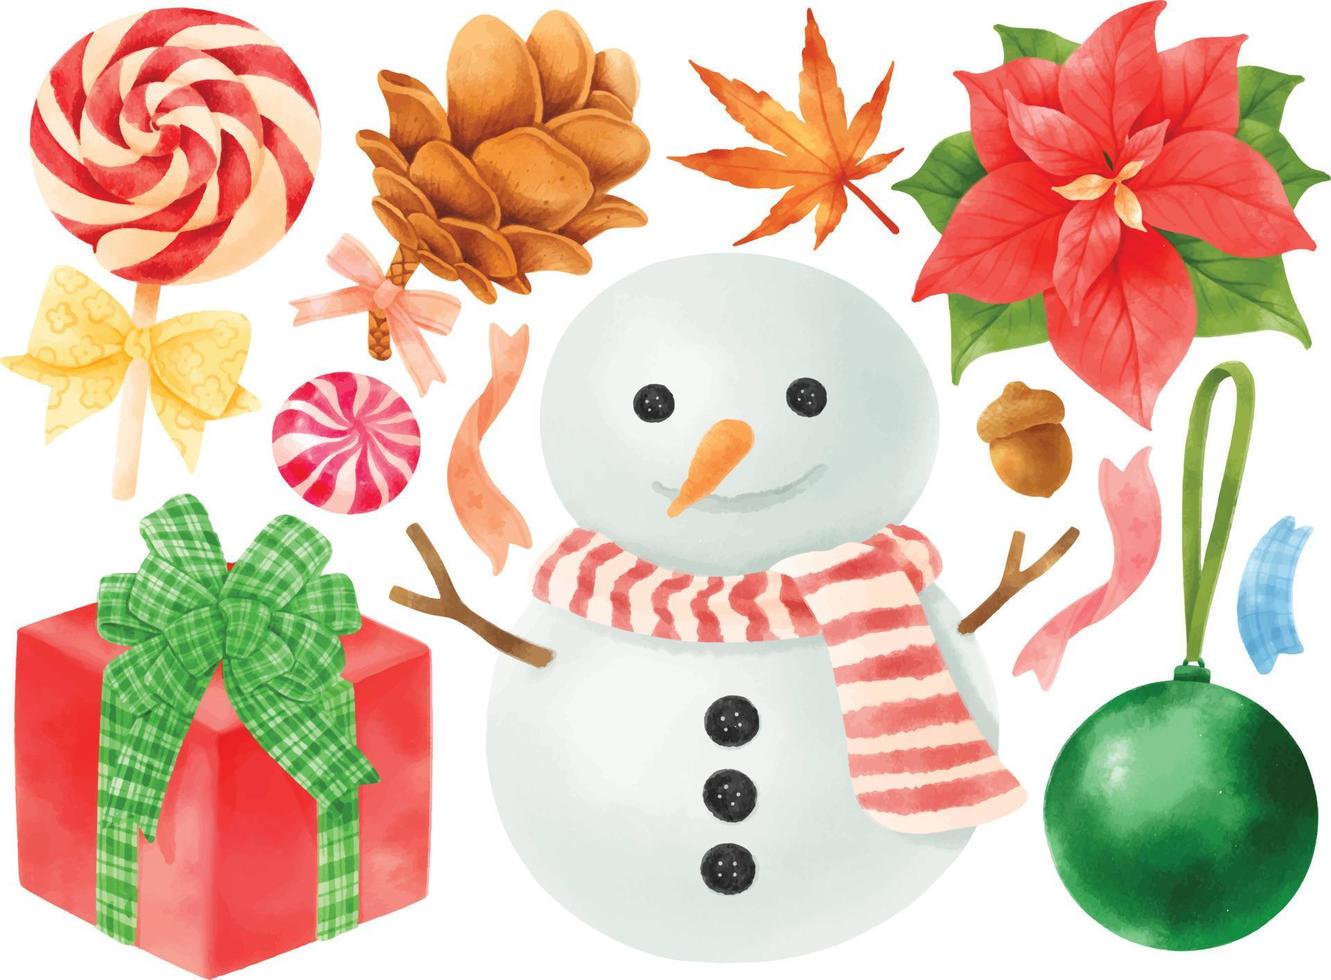 Christmas decoration elements illustrations watercolor styles vector